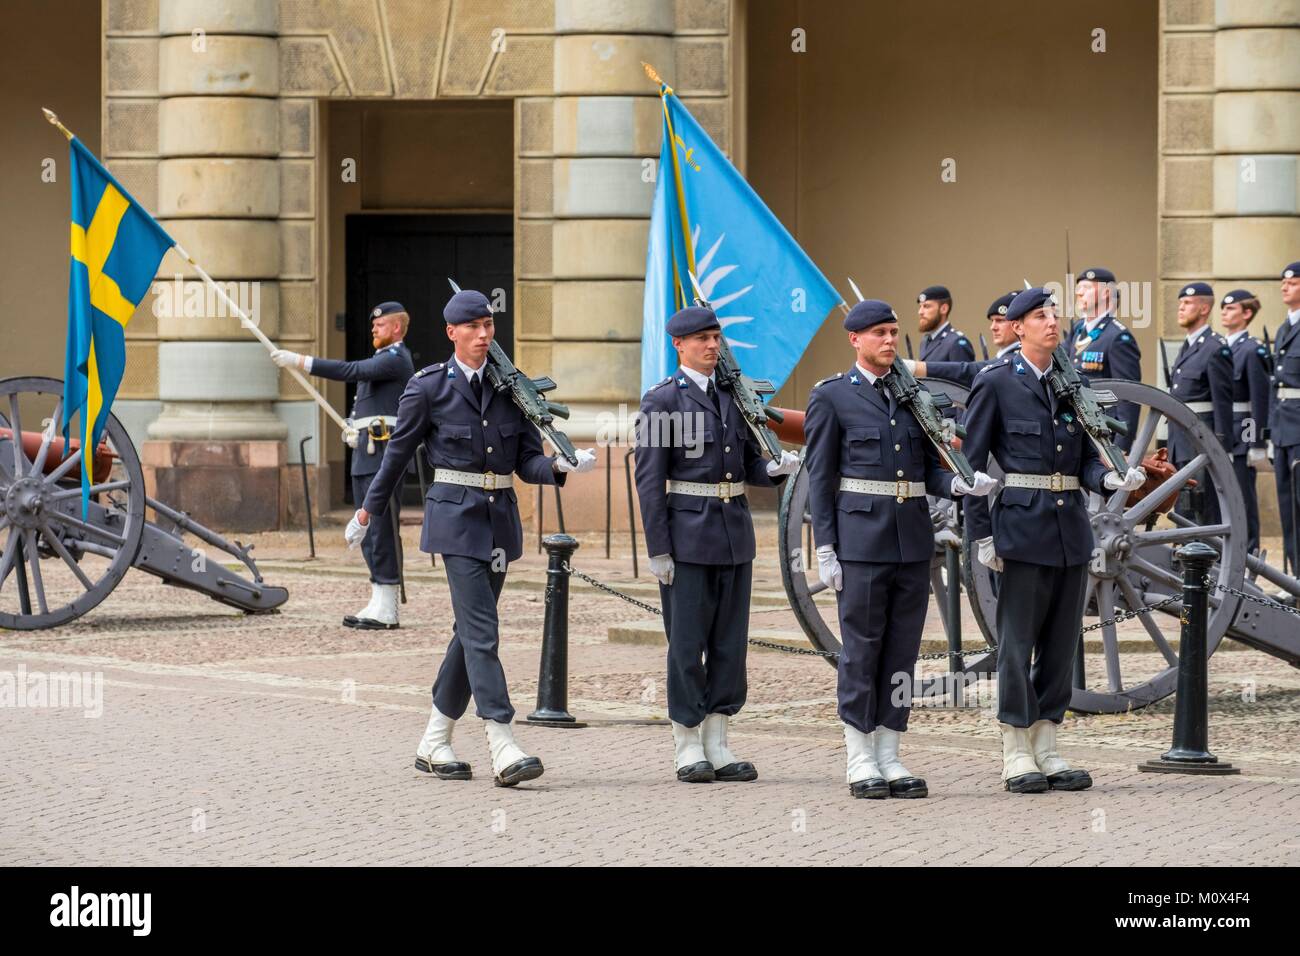 Sweden,Stockholm,Gamla Stan Island,the Old City,the Royal Palace,the Royal Guard's succession Stock Photo